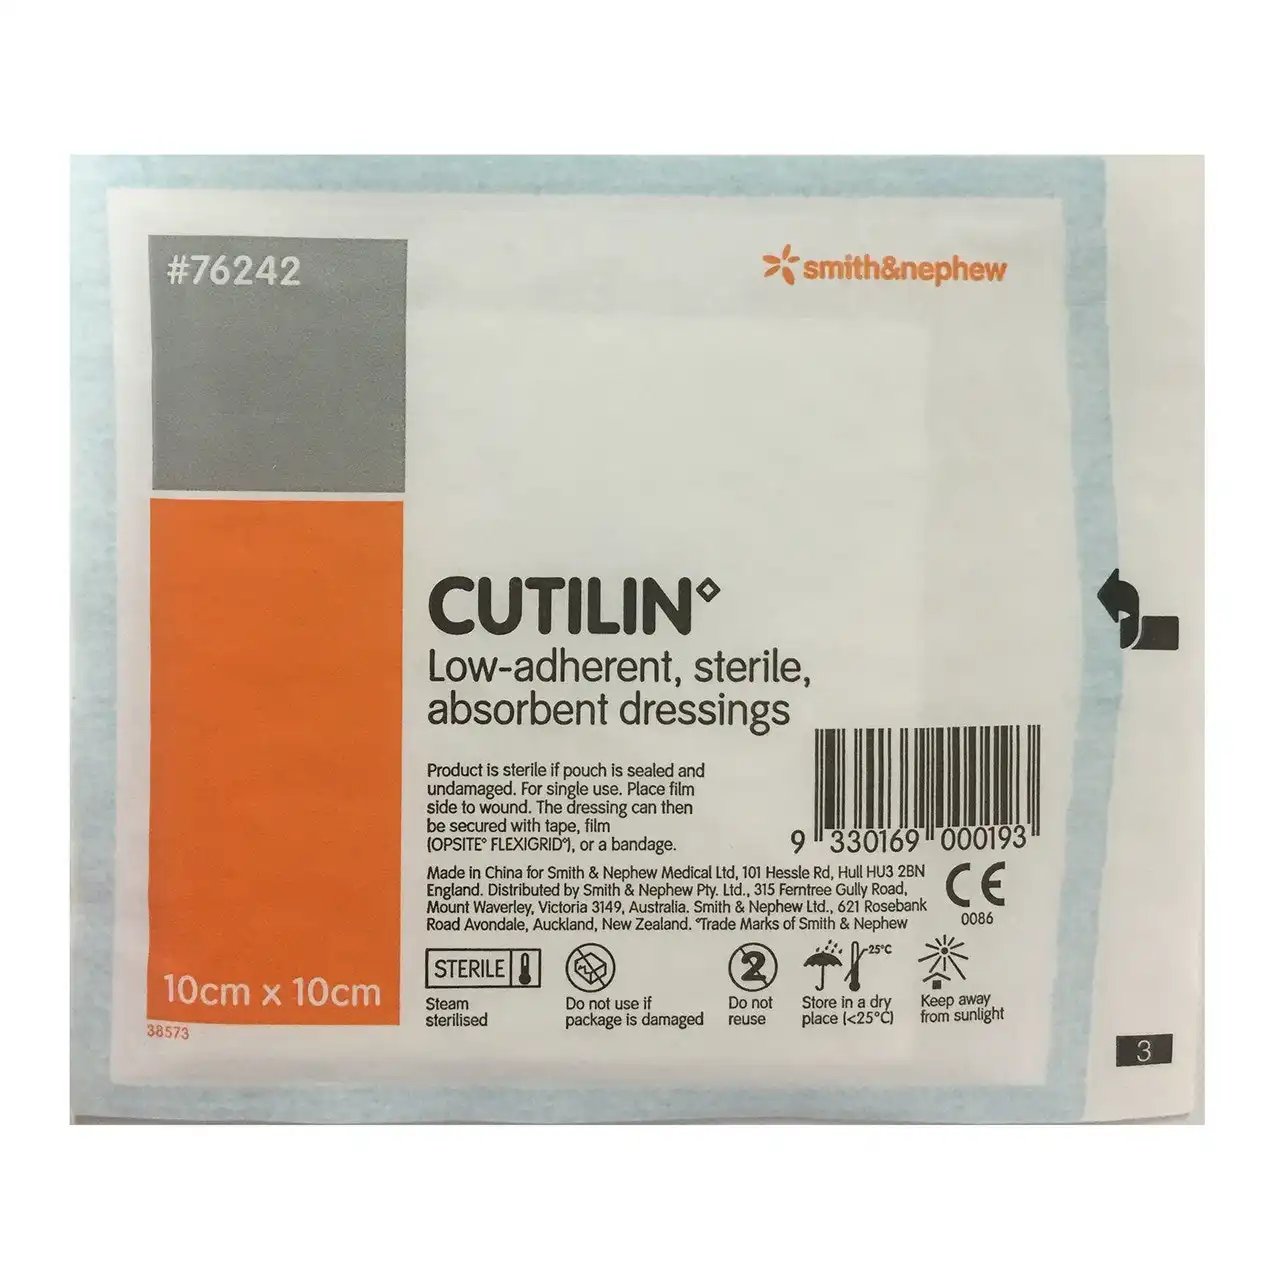 Cutilin Low-Adherent Sterile Absorbent Dressing 10cm x 10cm